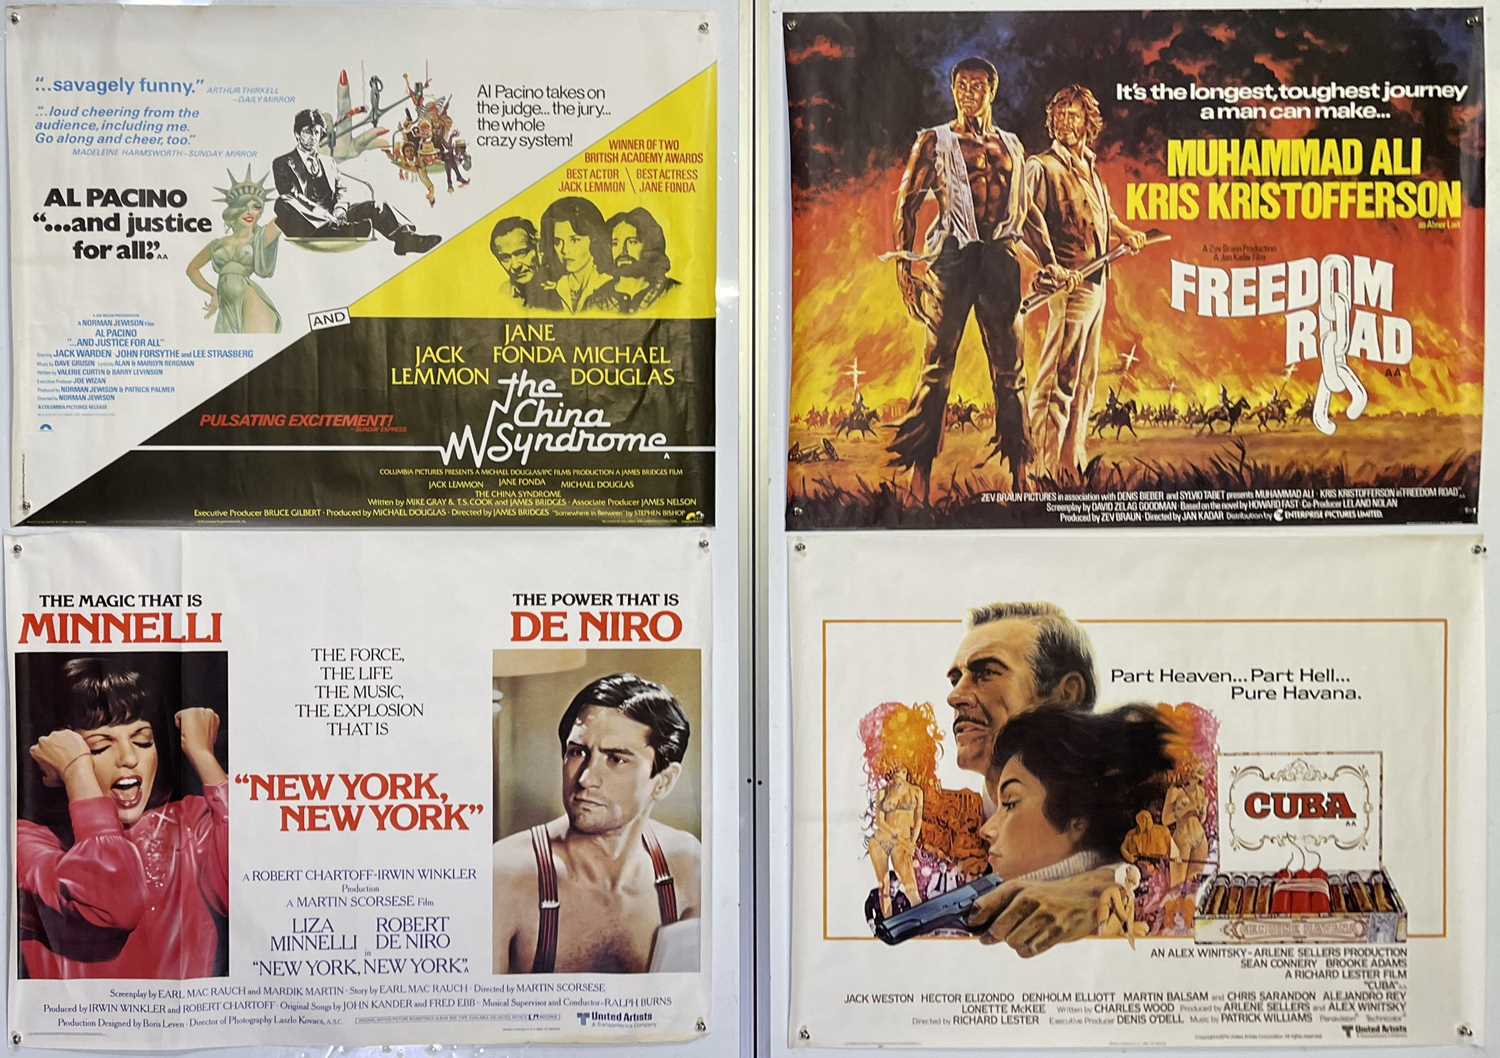 Lot 200 - 1970S UK QUAD POSTER COLLECTION.